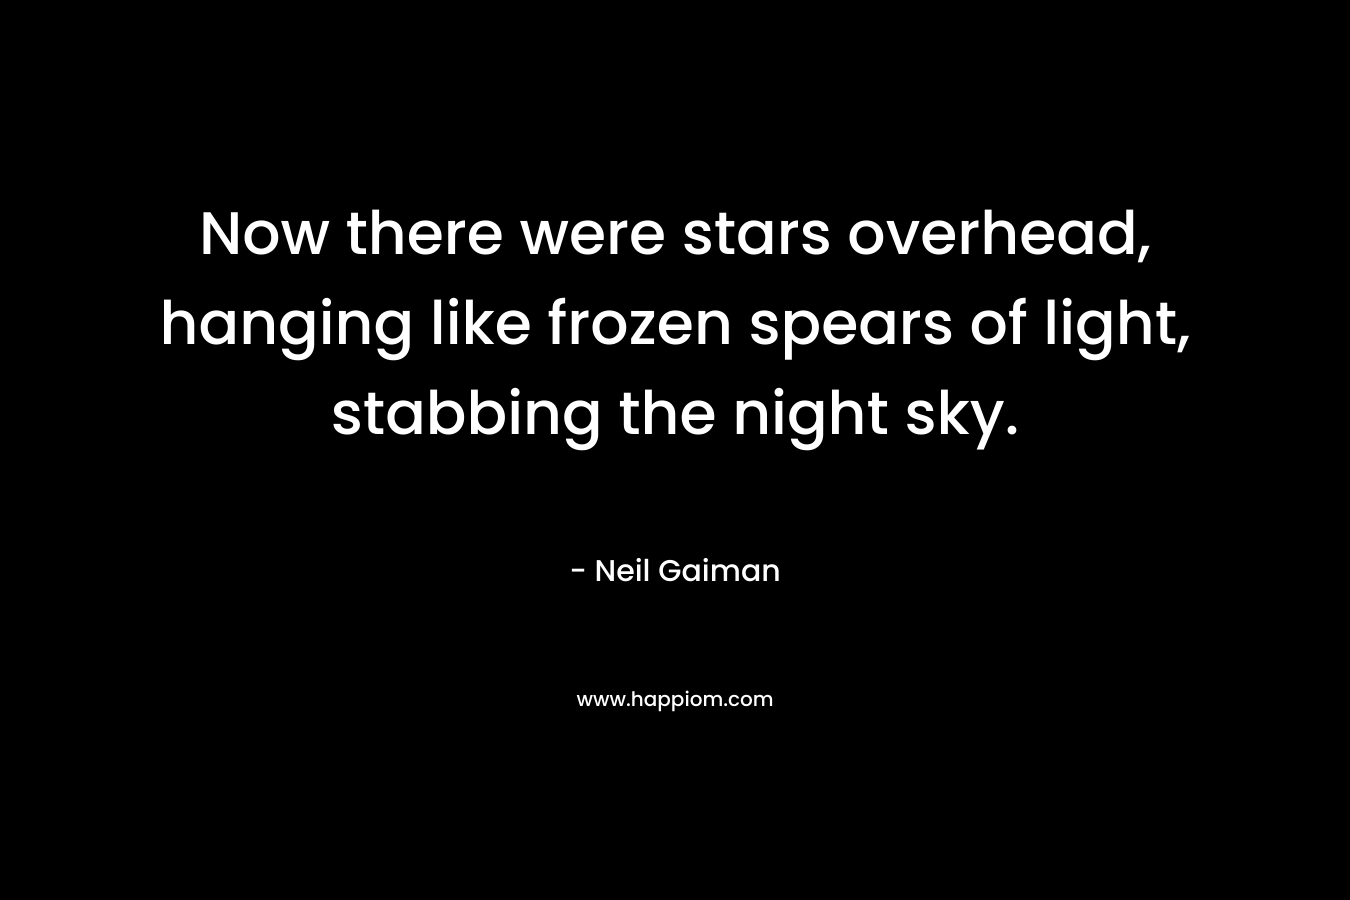 Now there were stars overhead, hanging like frozen spears of light, stabbing the night sky. – Neil Gaiman